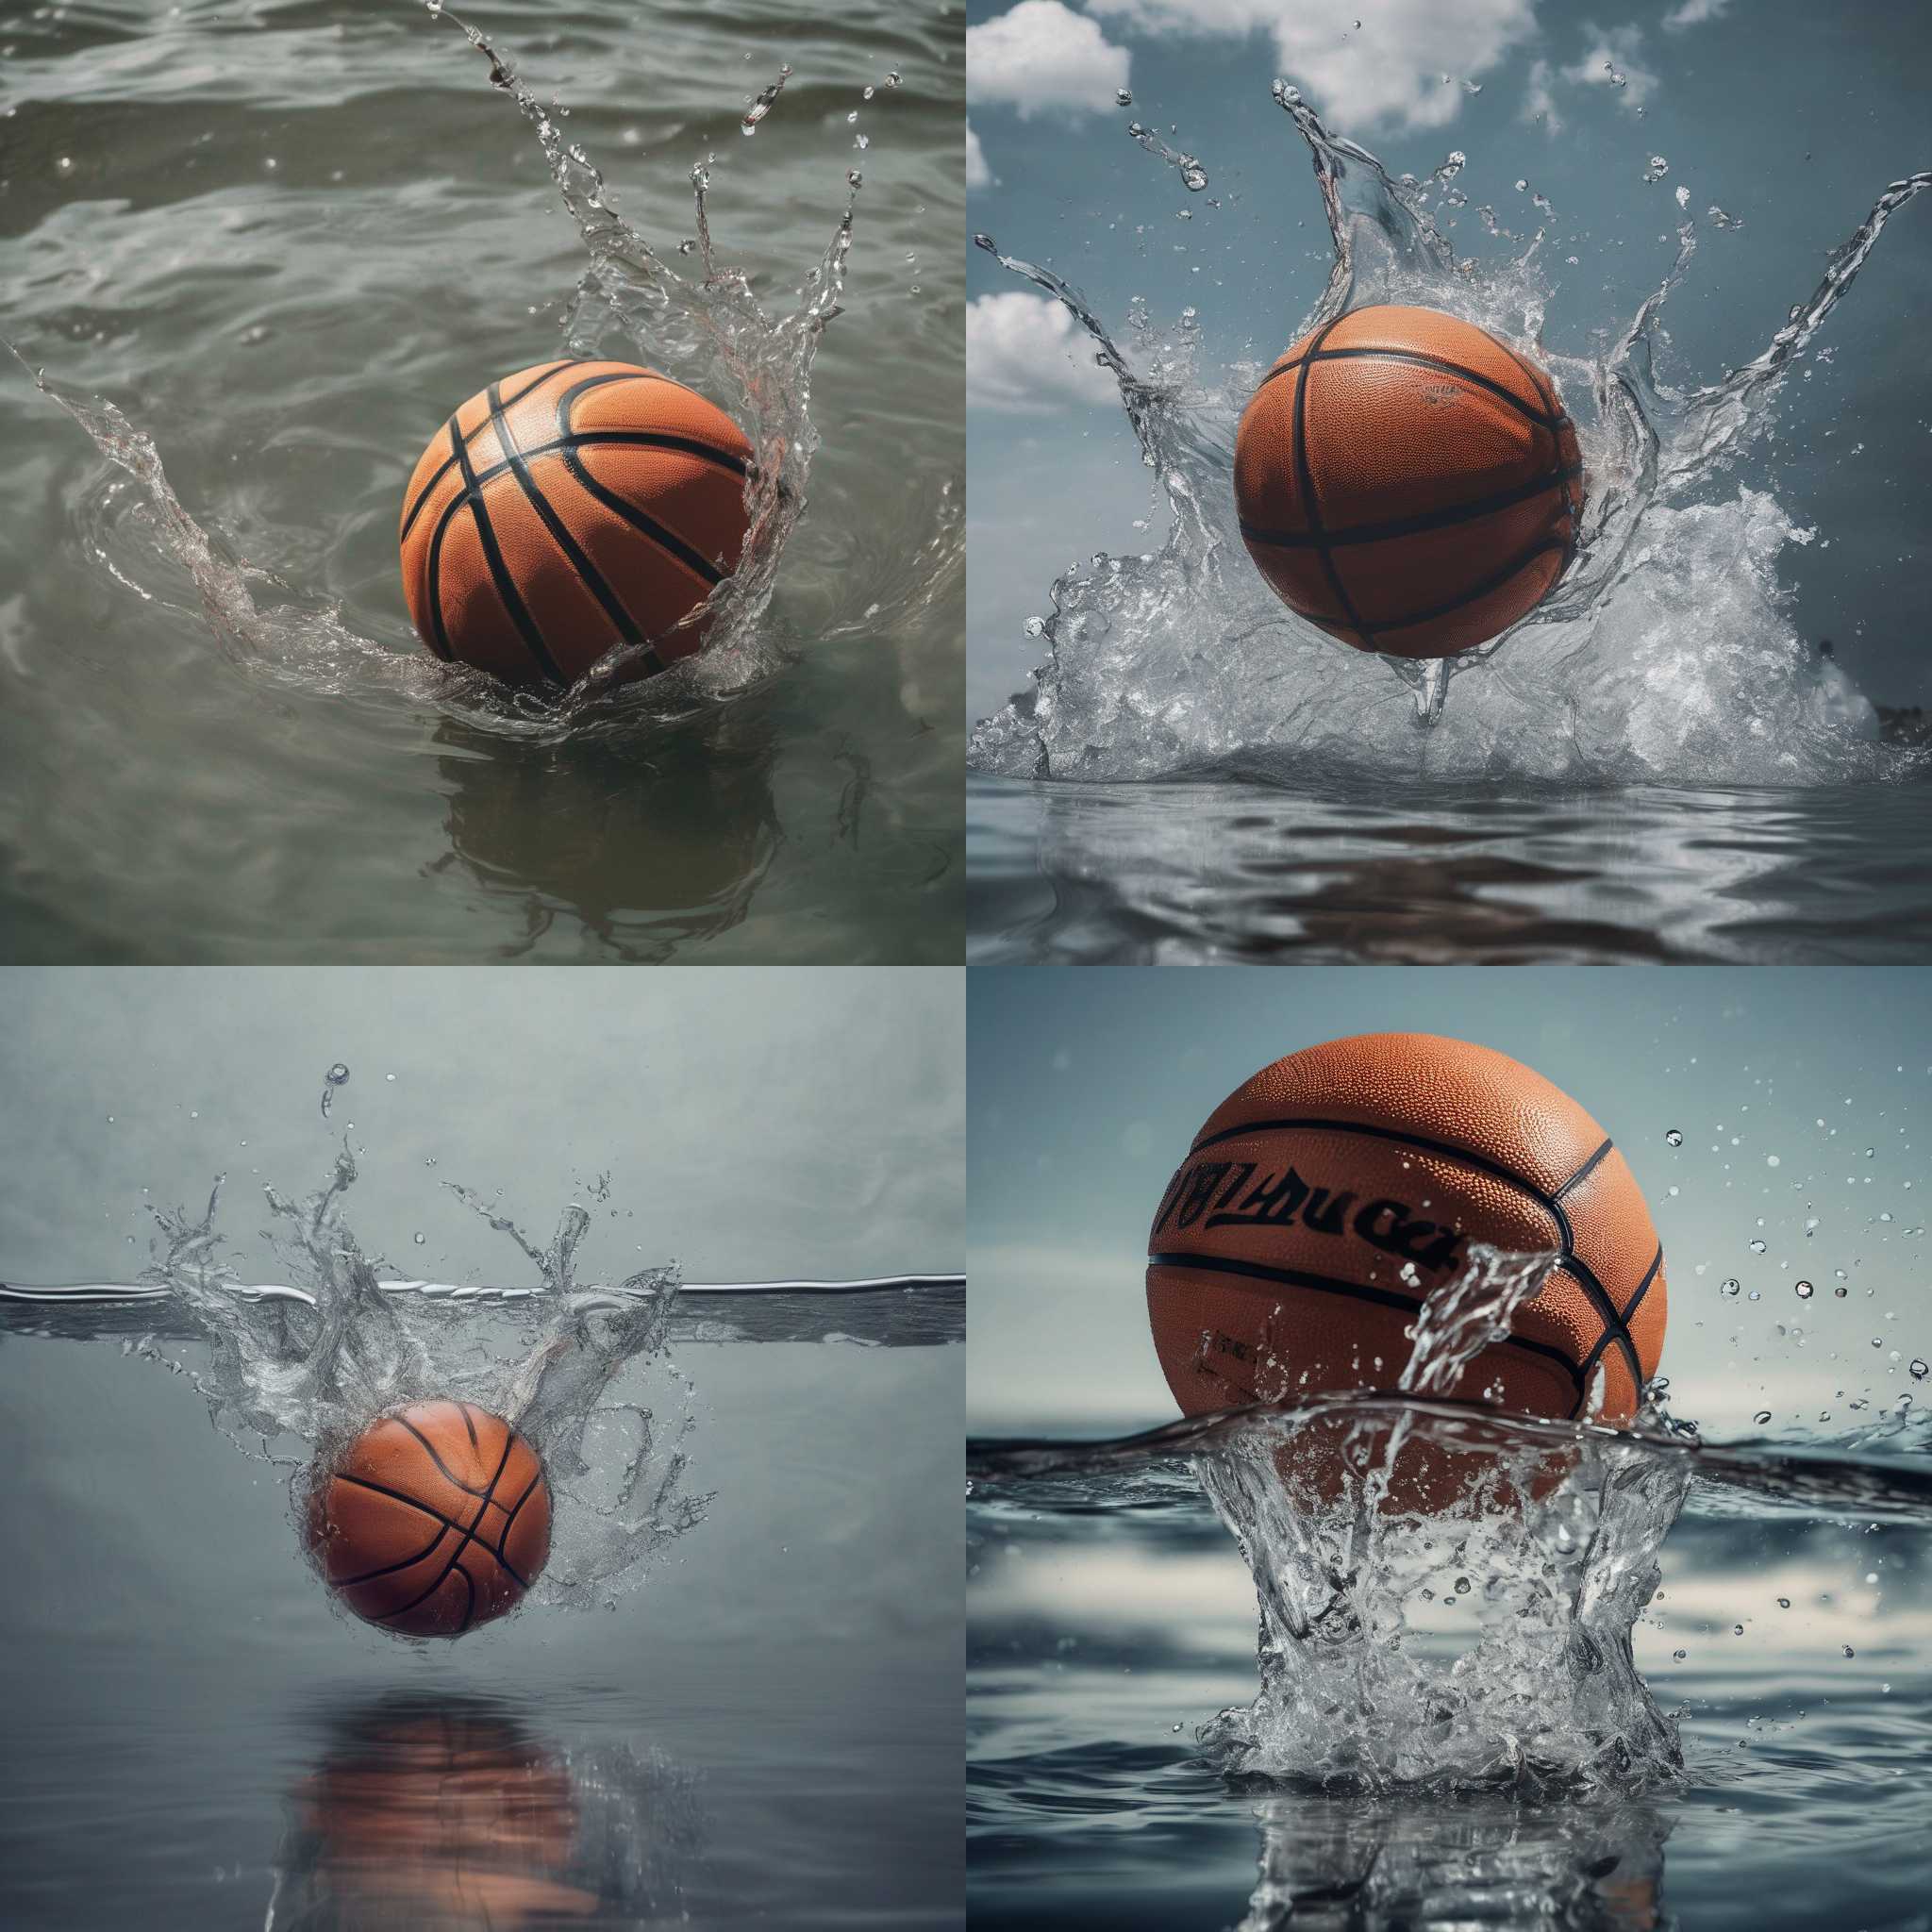 A basketball in water